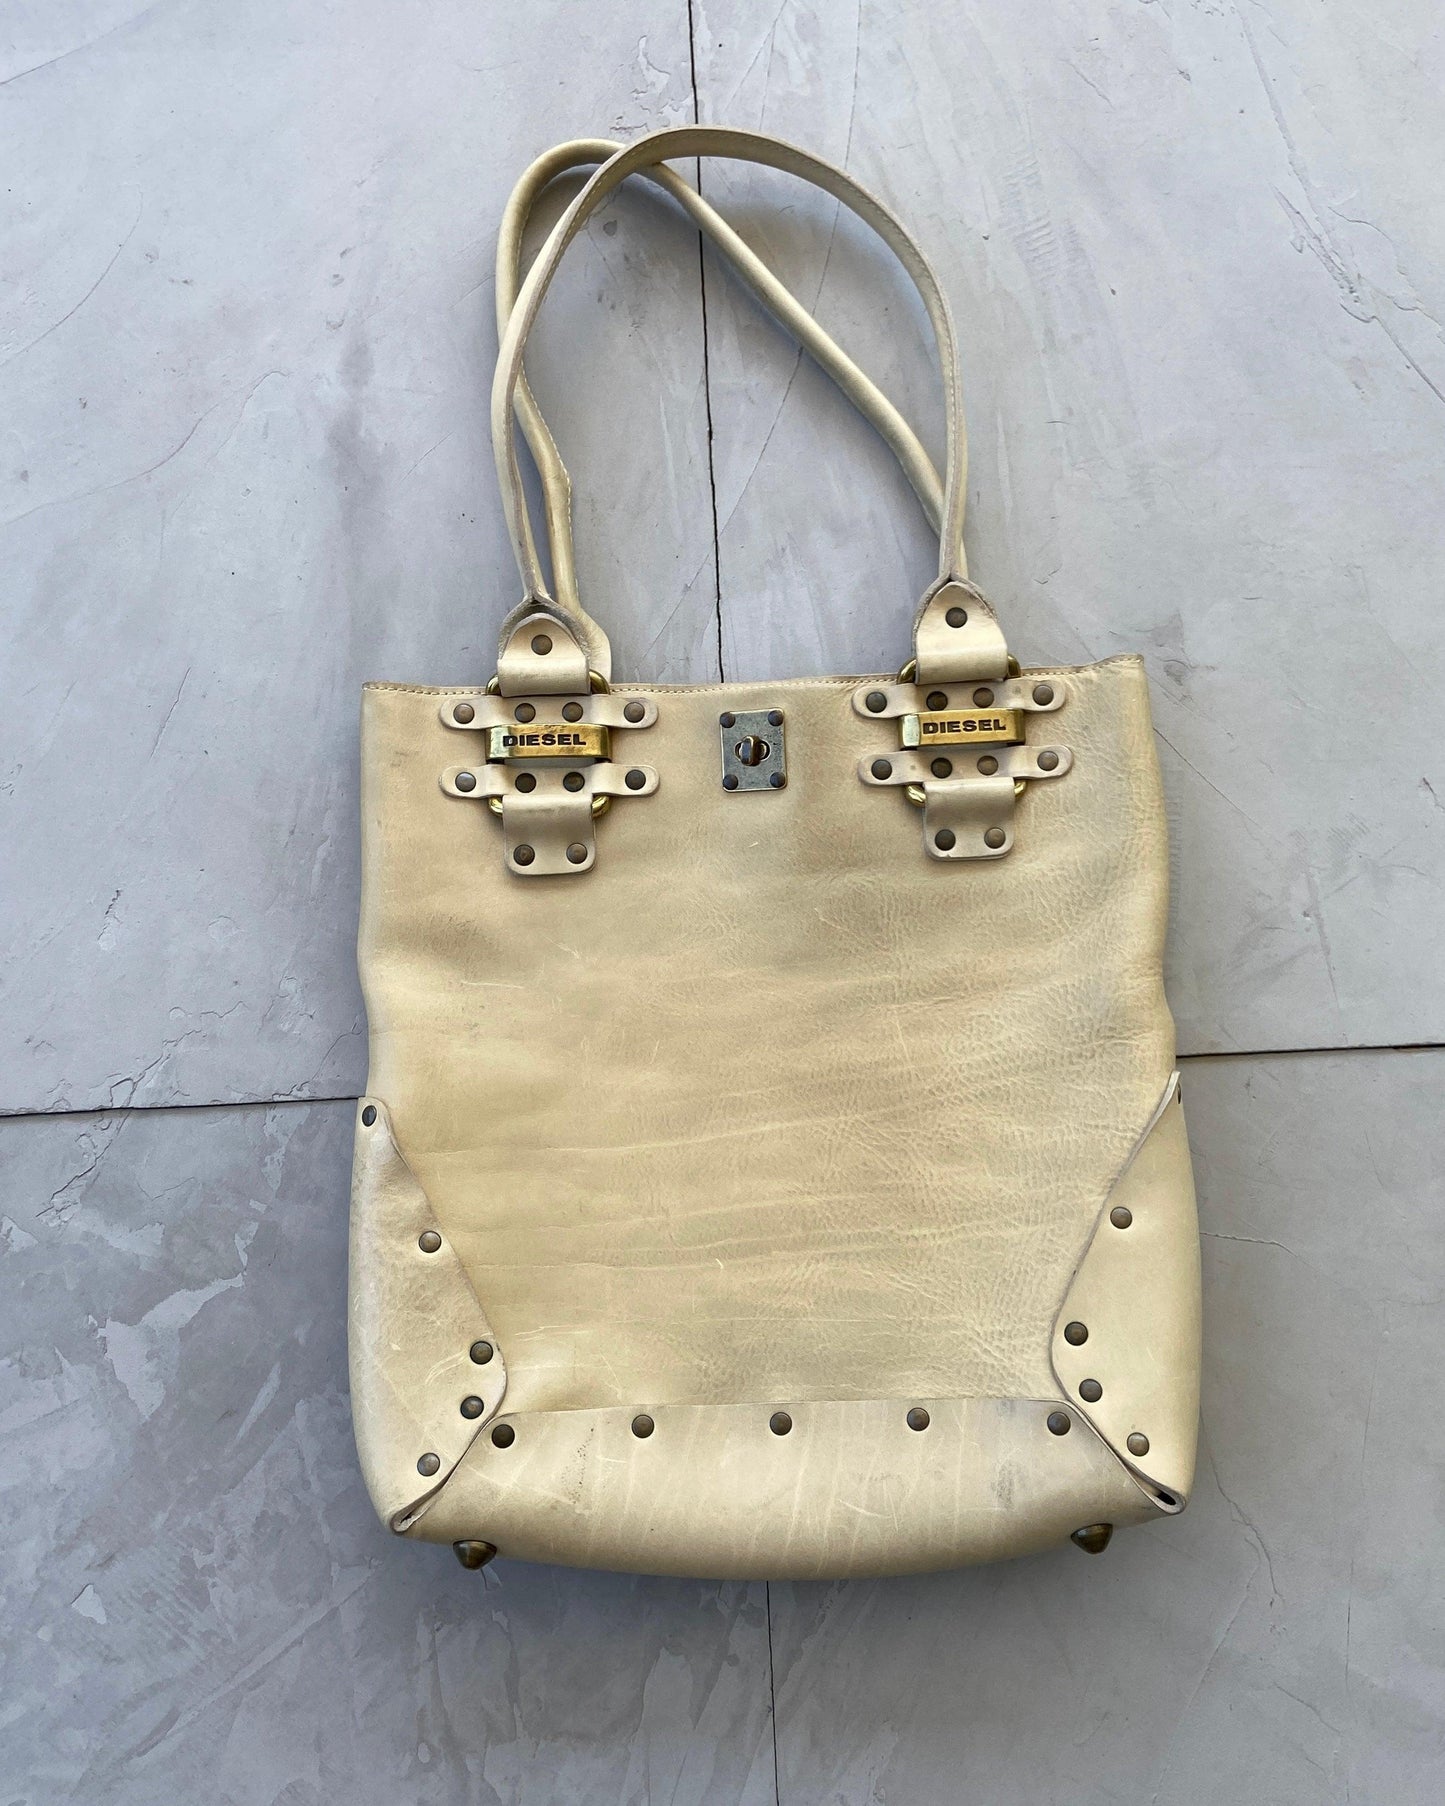 DIESEL 2000'S LEATHER STUDDED TOTE BAG - Known Source